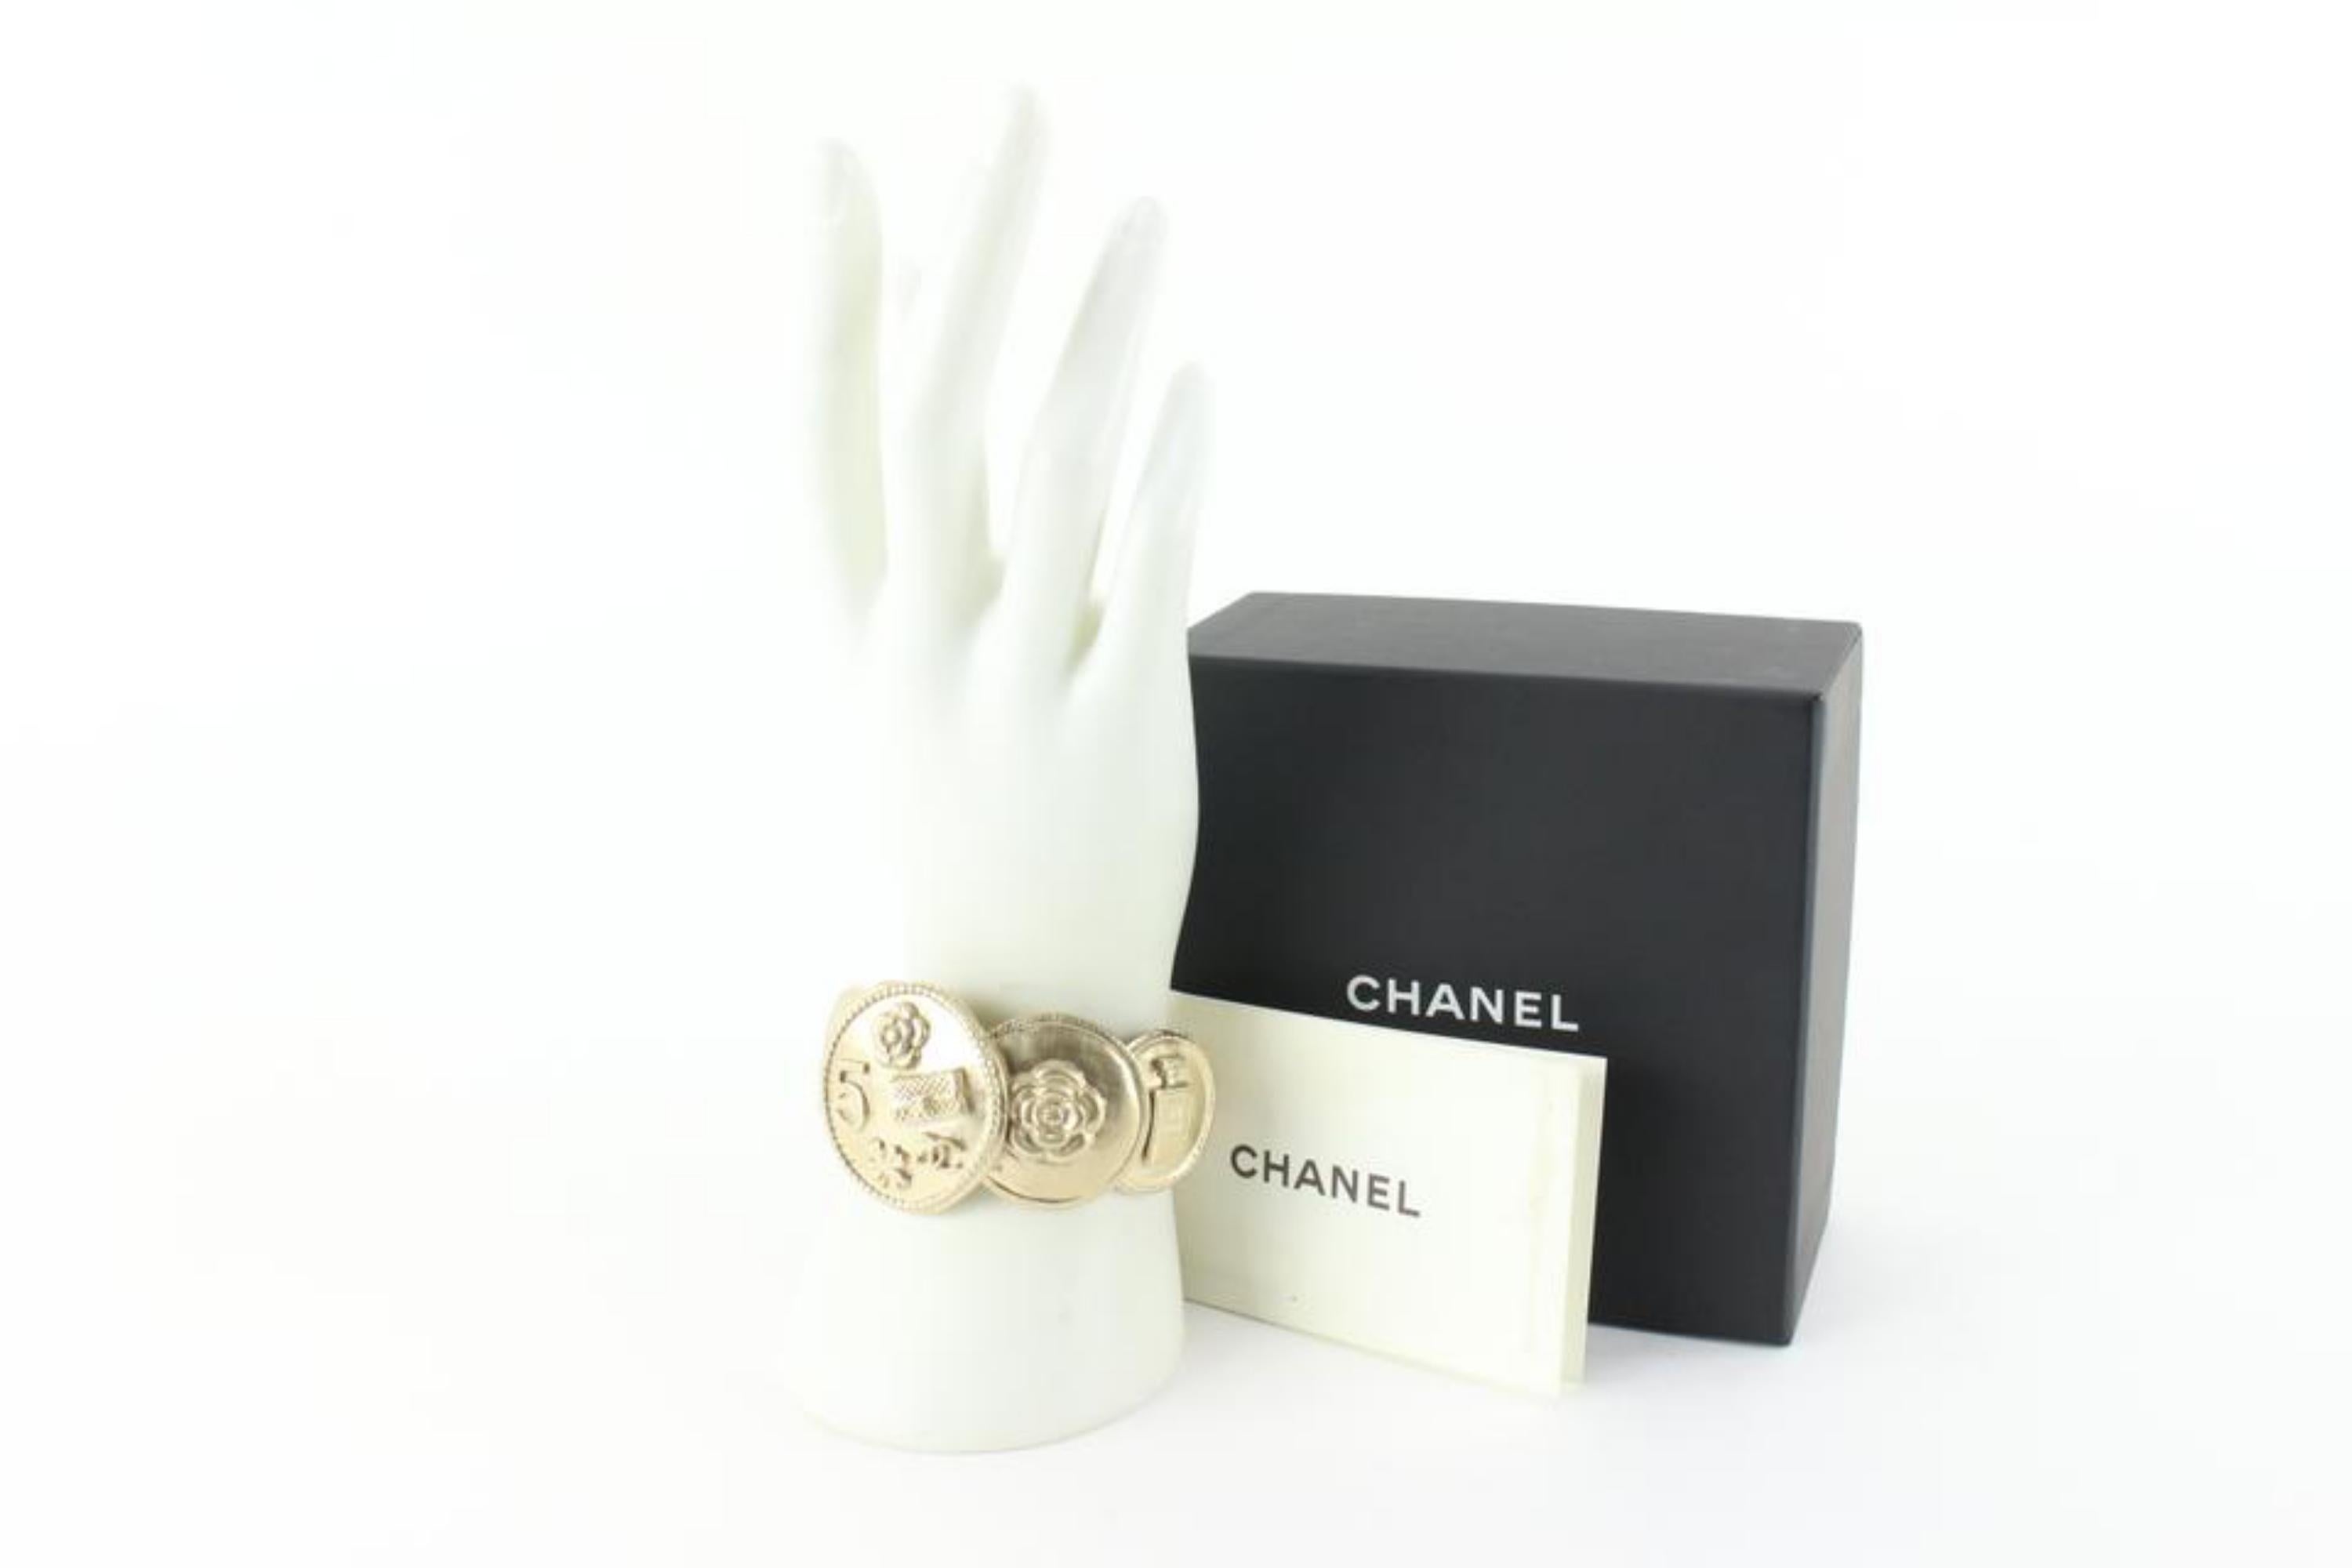 Chanel B14P Icon Coin Bangle Bracelet Cuff 88ck89s In Excellent Condition For Sale In Dix hills, NY